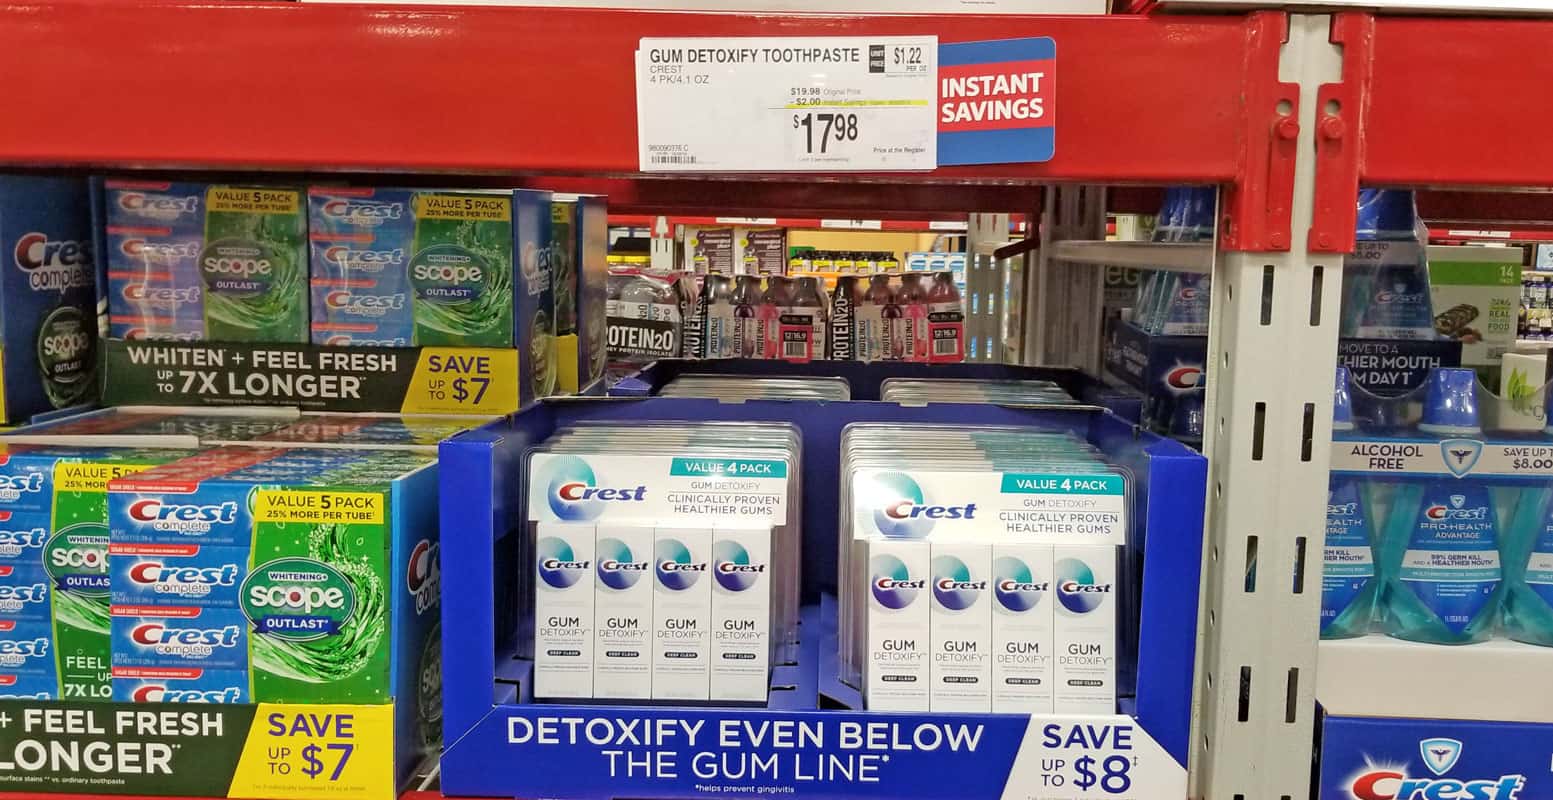 How To Improve Gum Health And Why It's Important with Crest Gum Detoxify In-store at Sam's Club